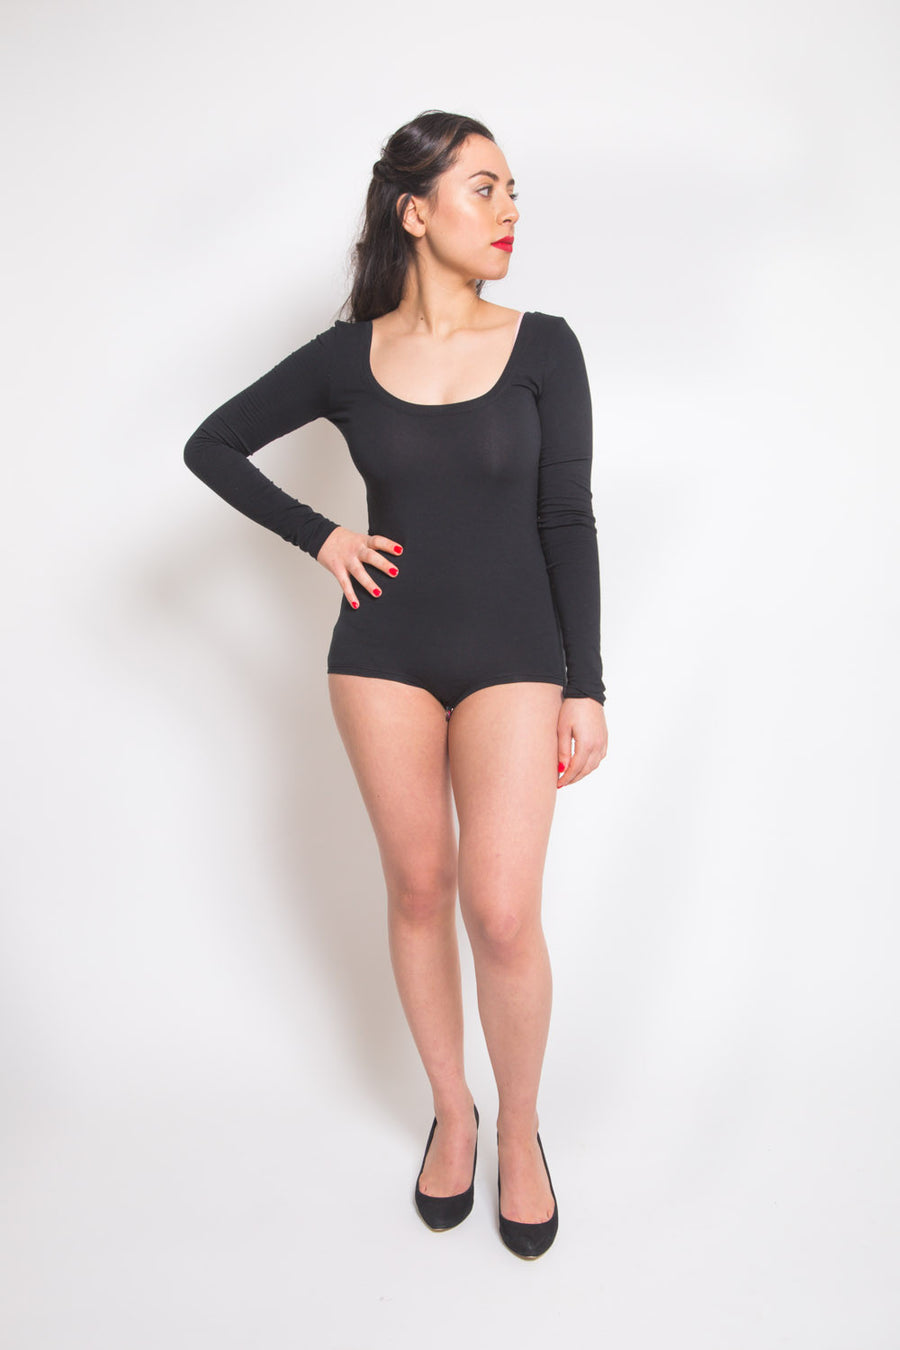 Over $150 Recycled Polyester Bodysuits.